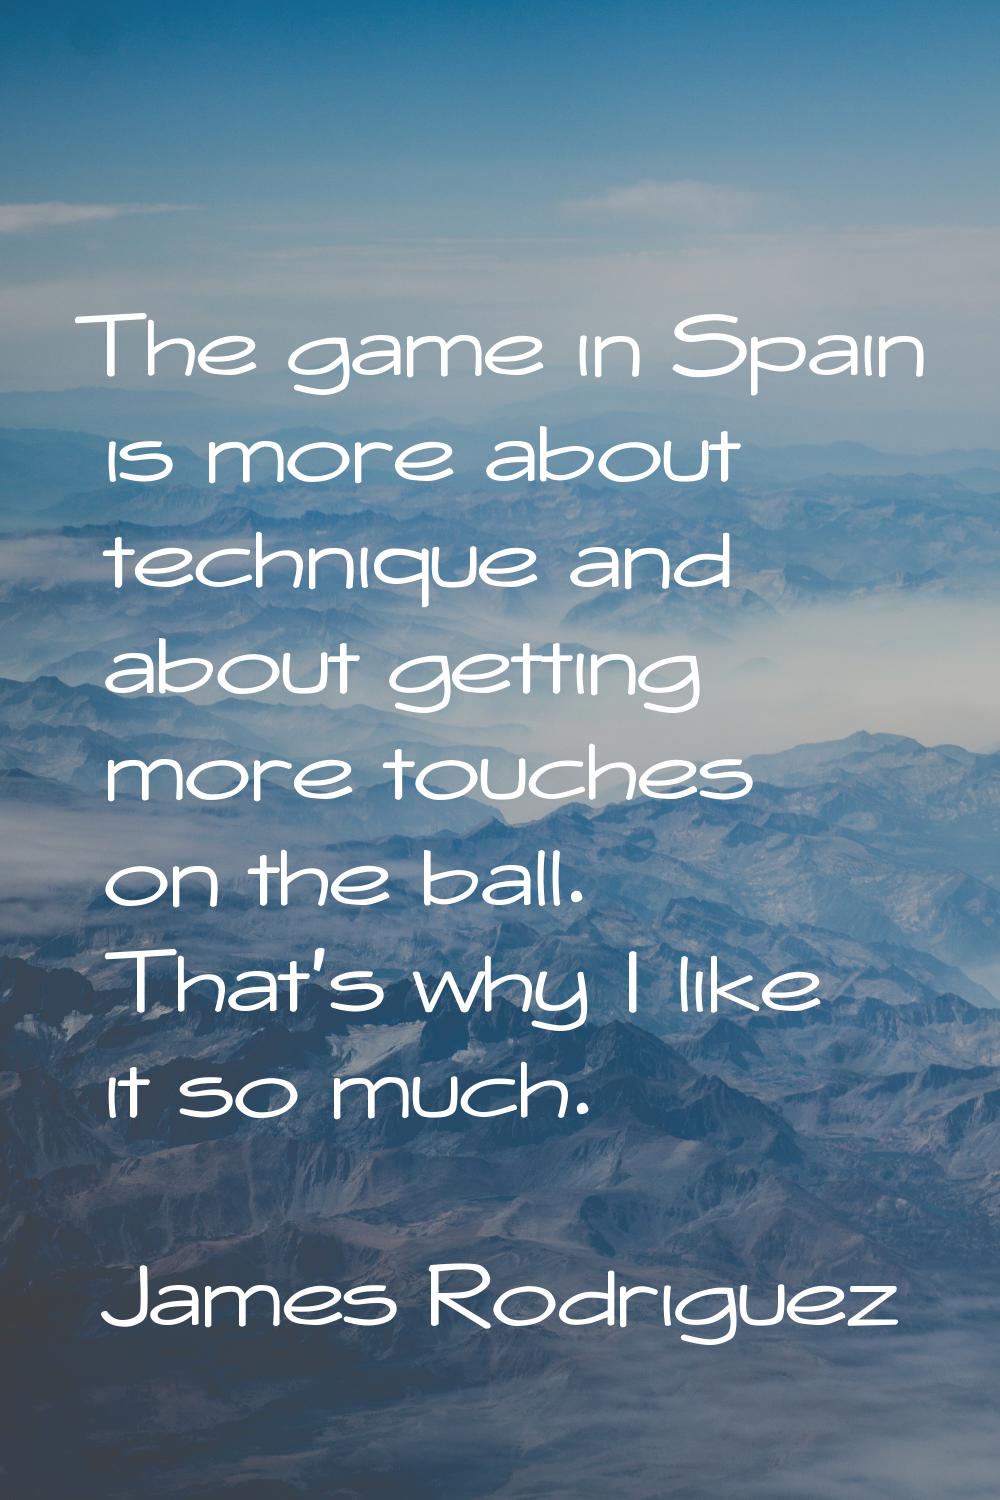 The game in Spain is more about technique and about getting more touches on the ball. That's why I 